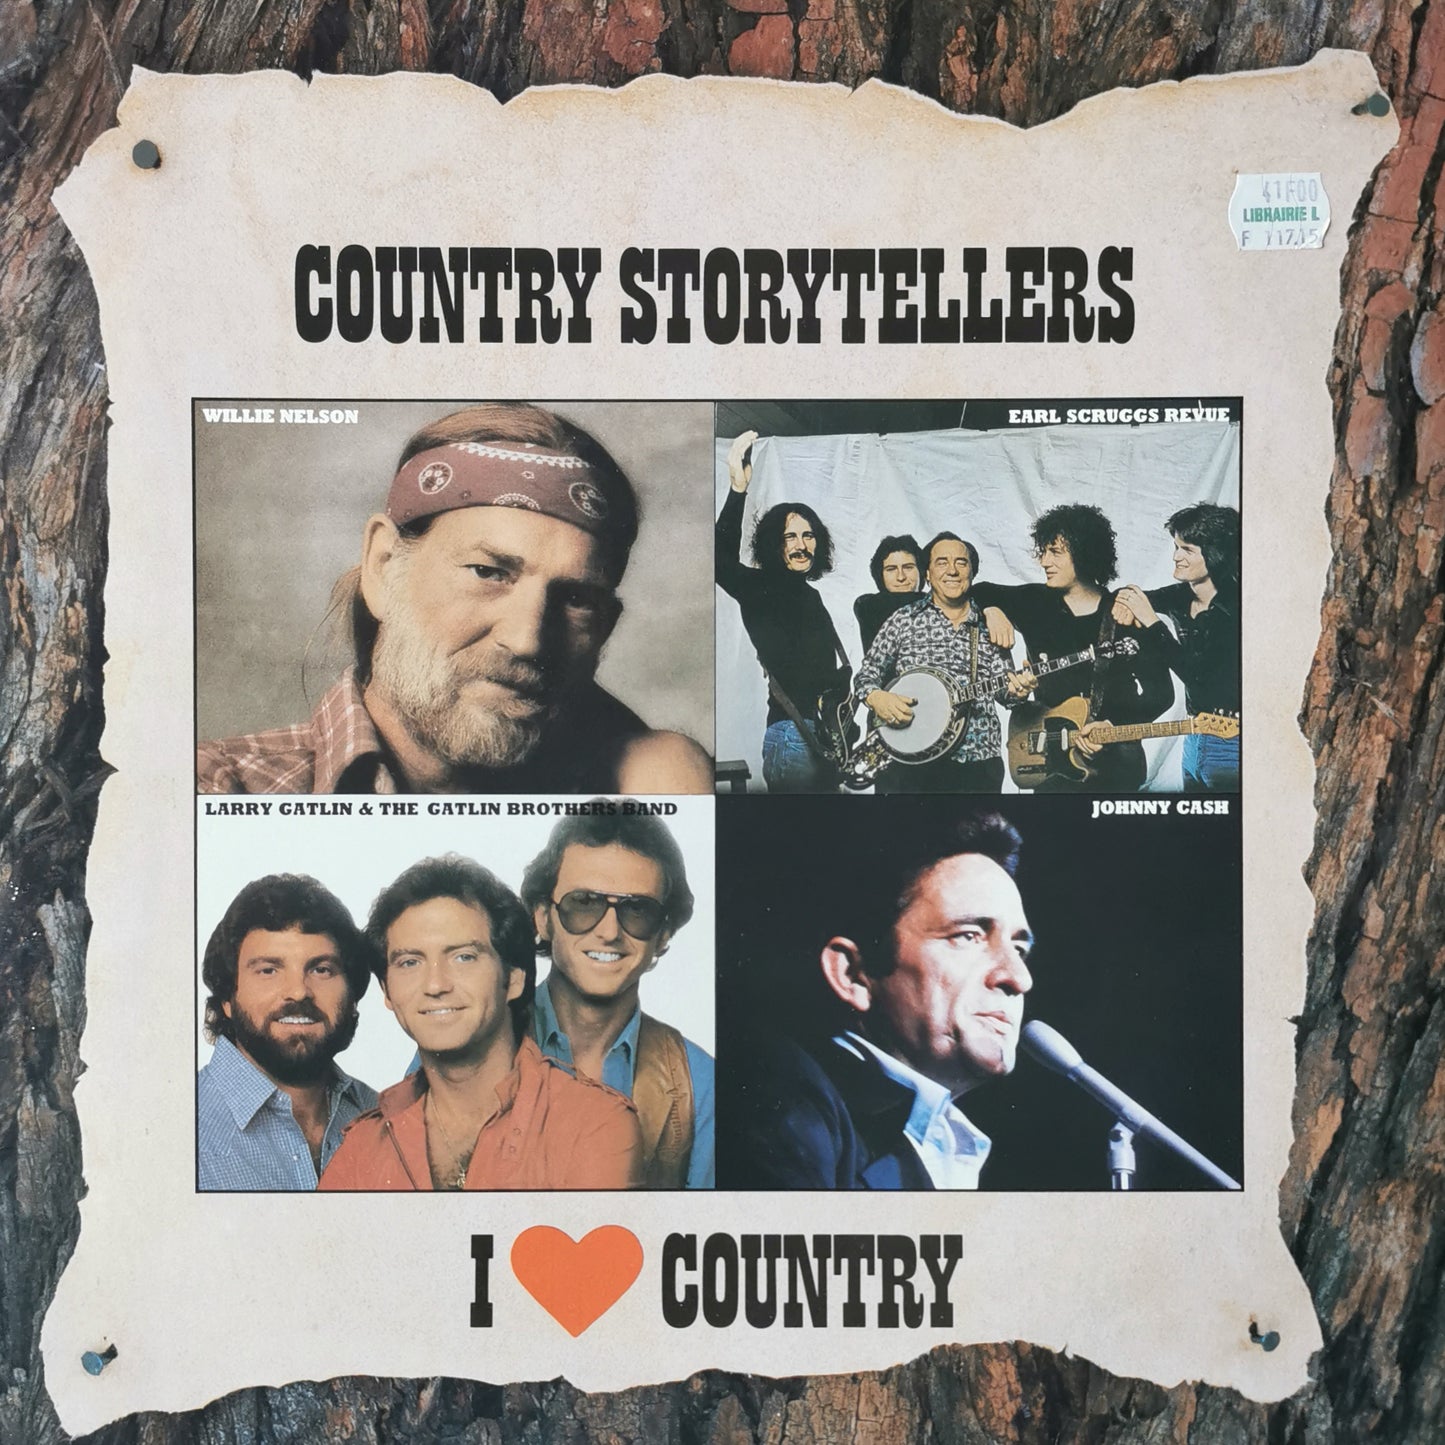 COUNTRY STORYTELLERS